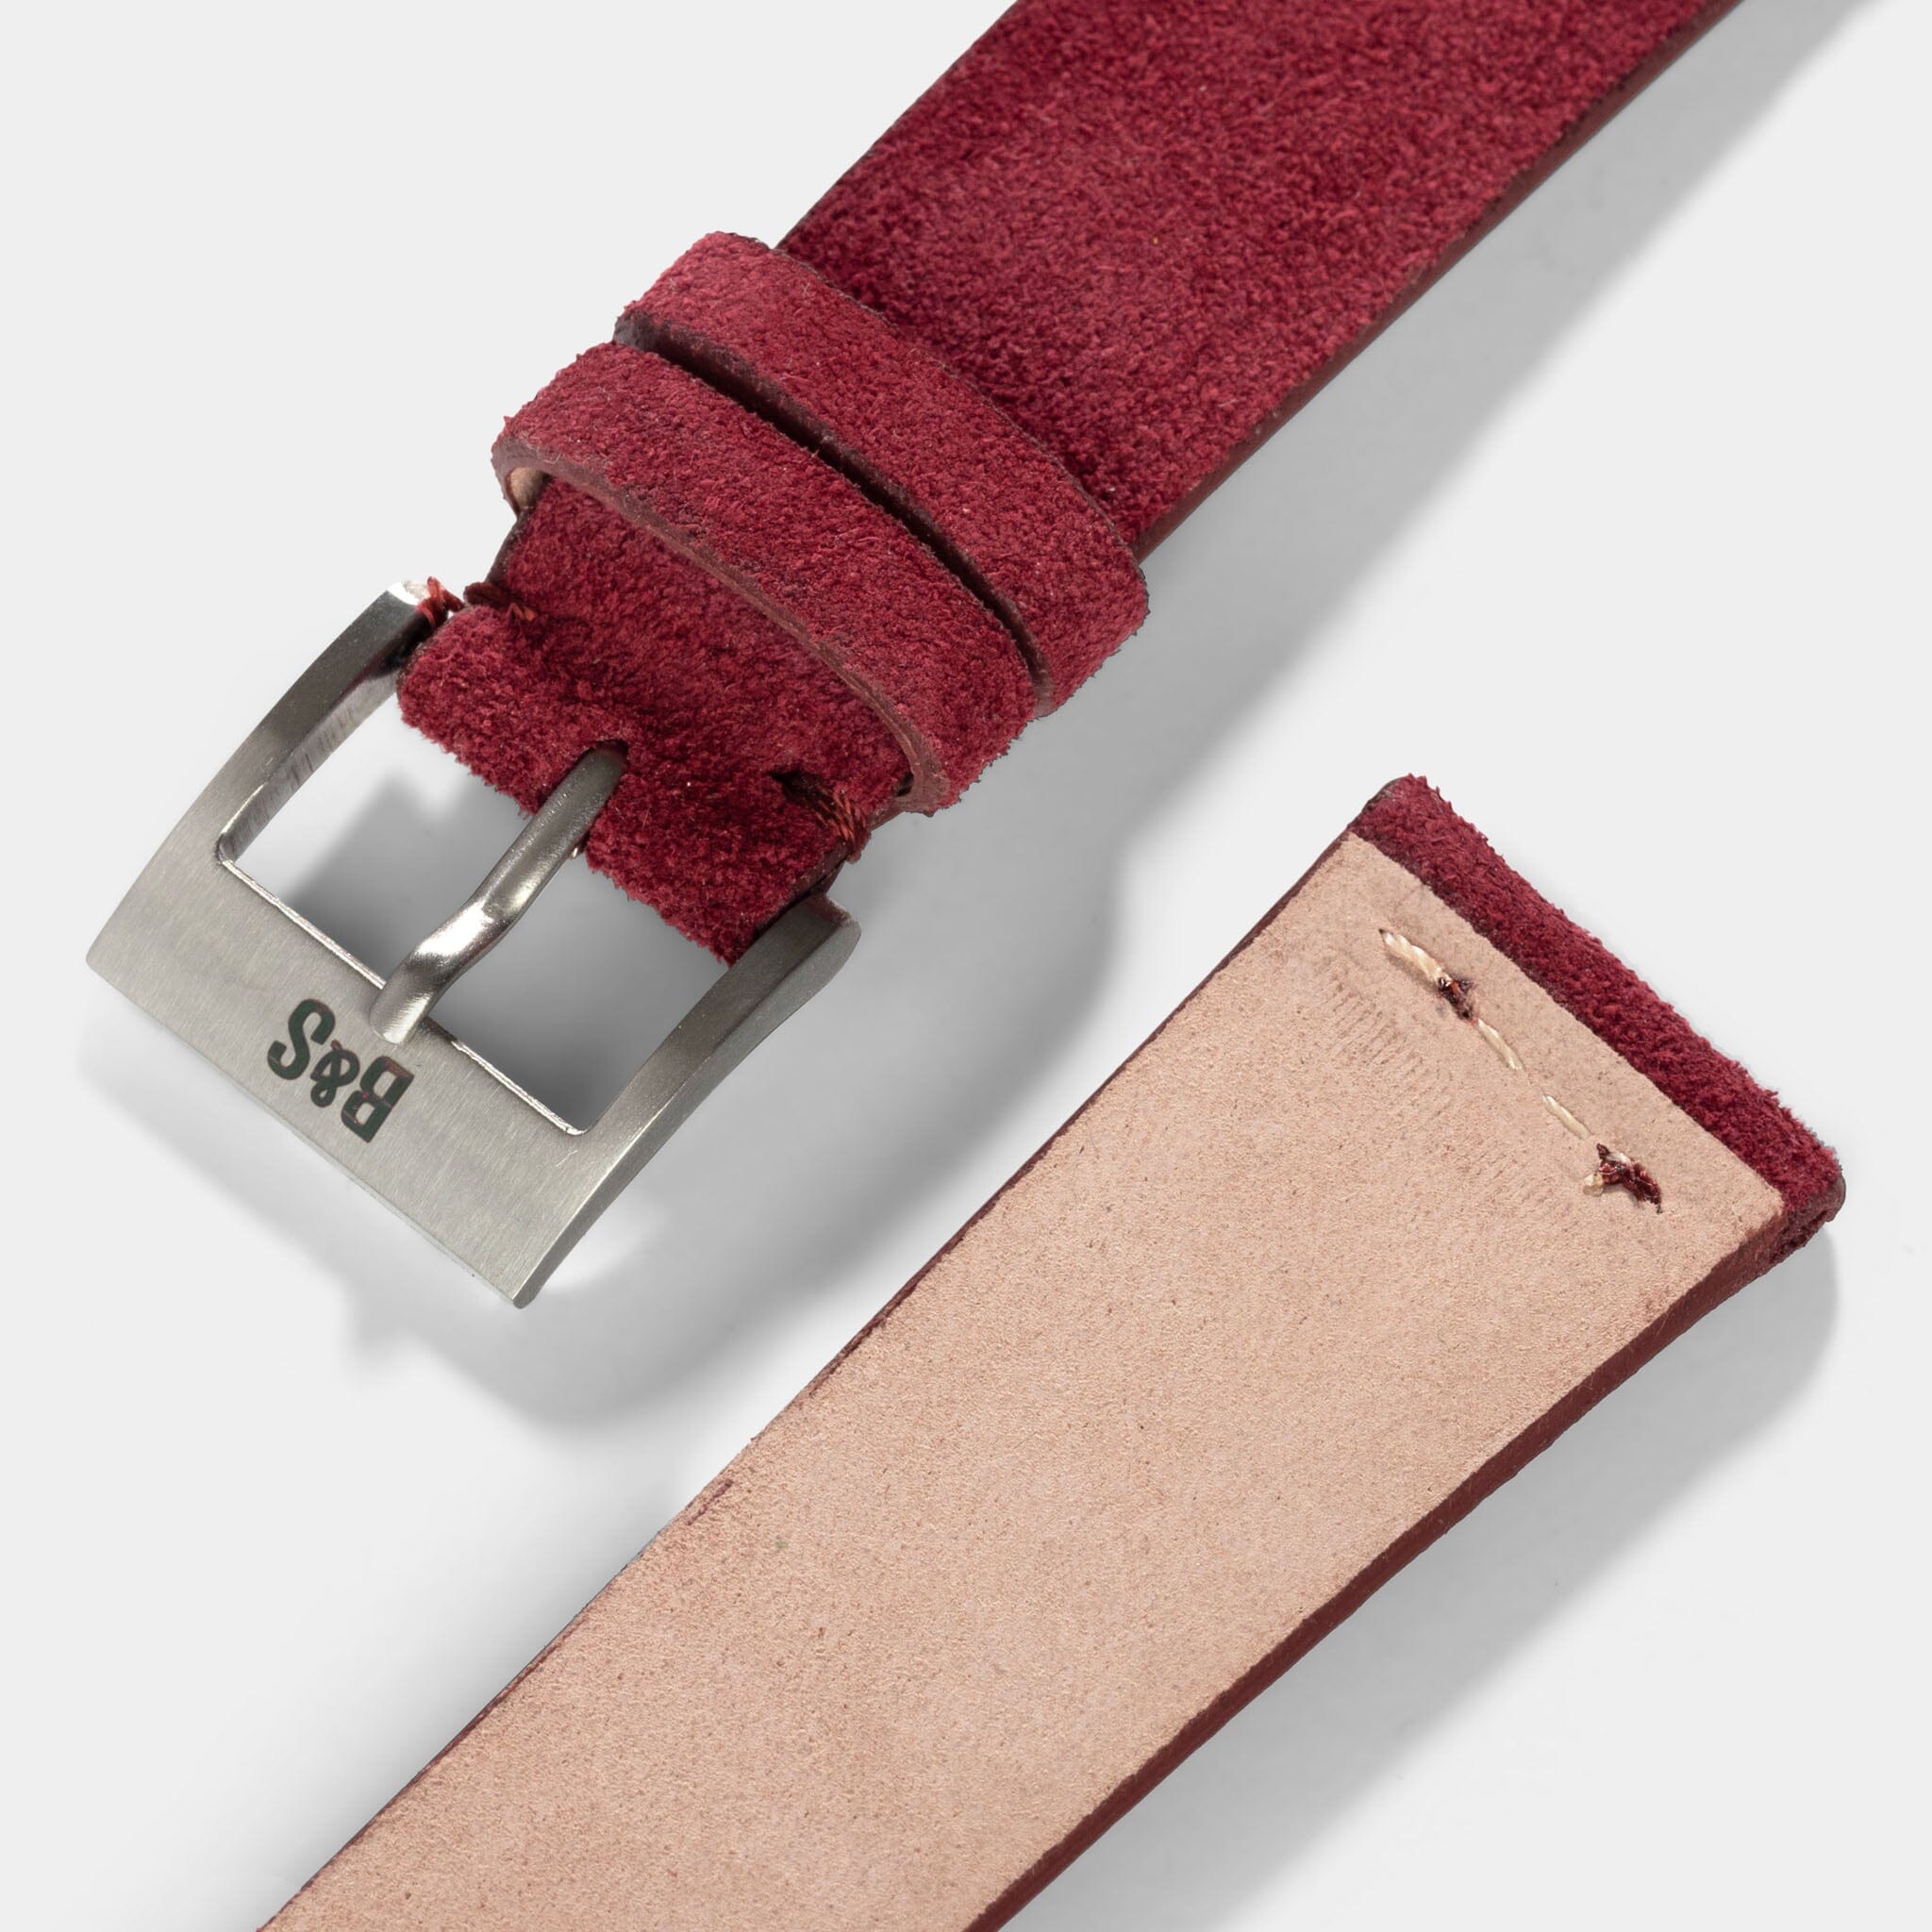 Burgundy Red Silky Suede Leather Watch Strap